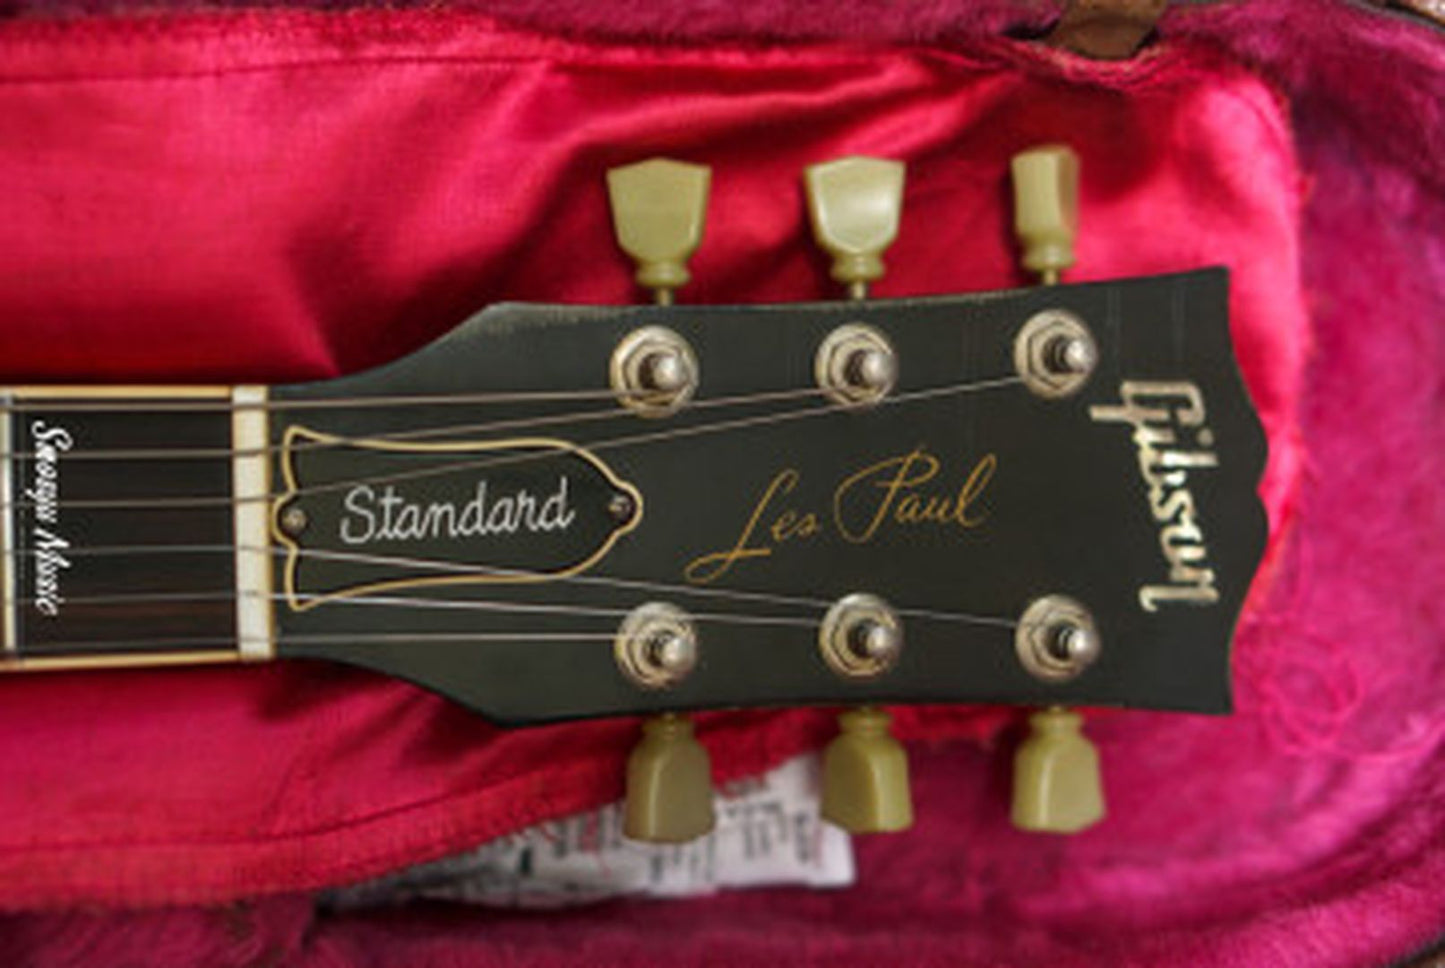 Gibson Les Paul Standard 1991 Relic